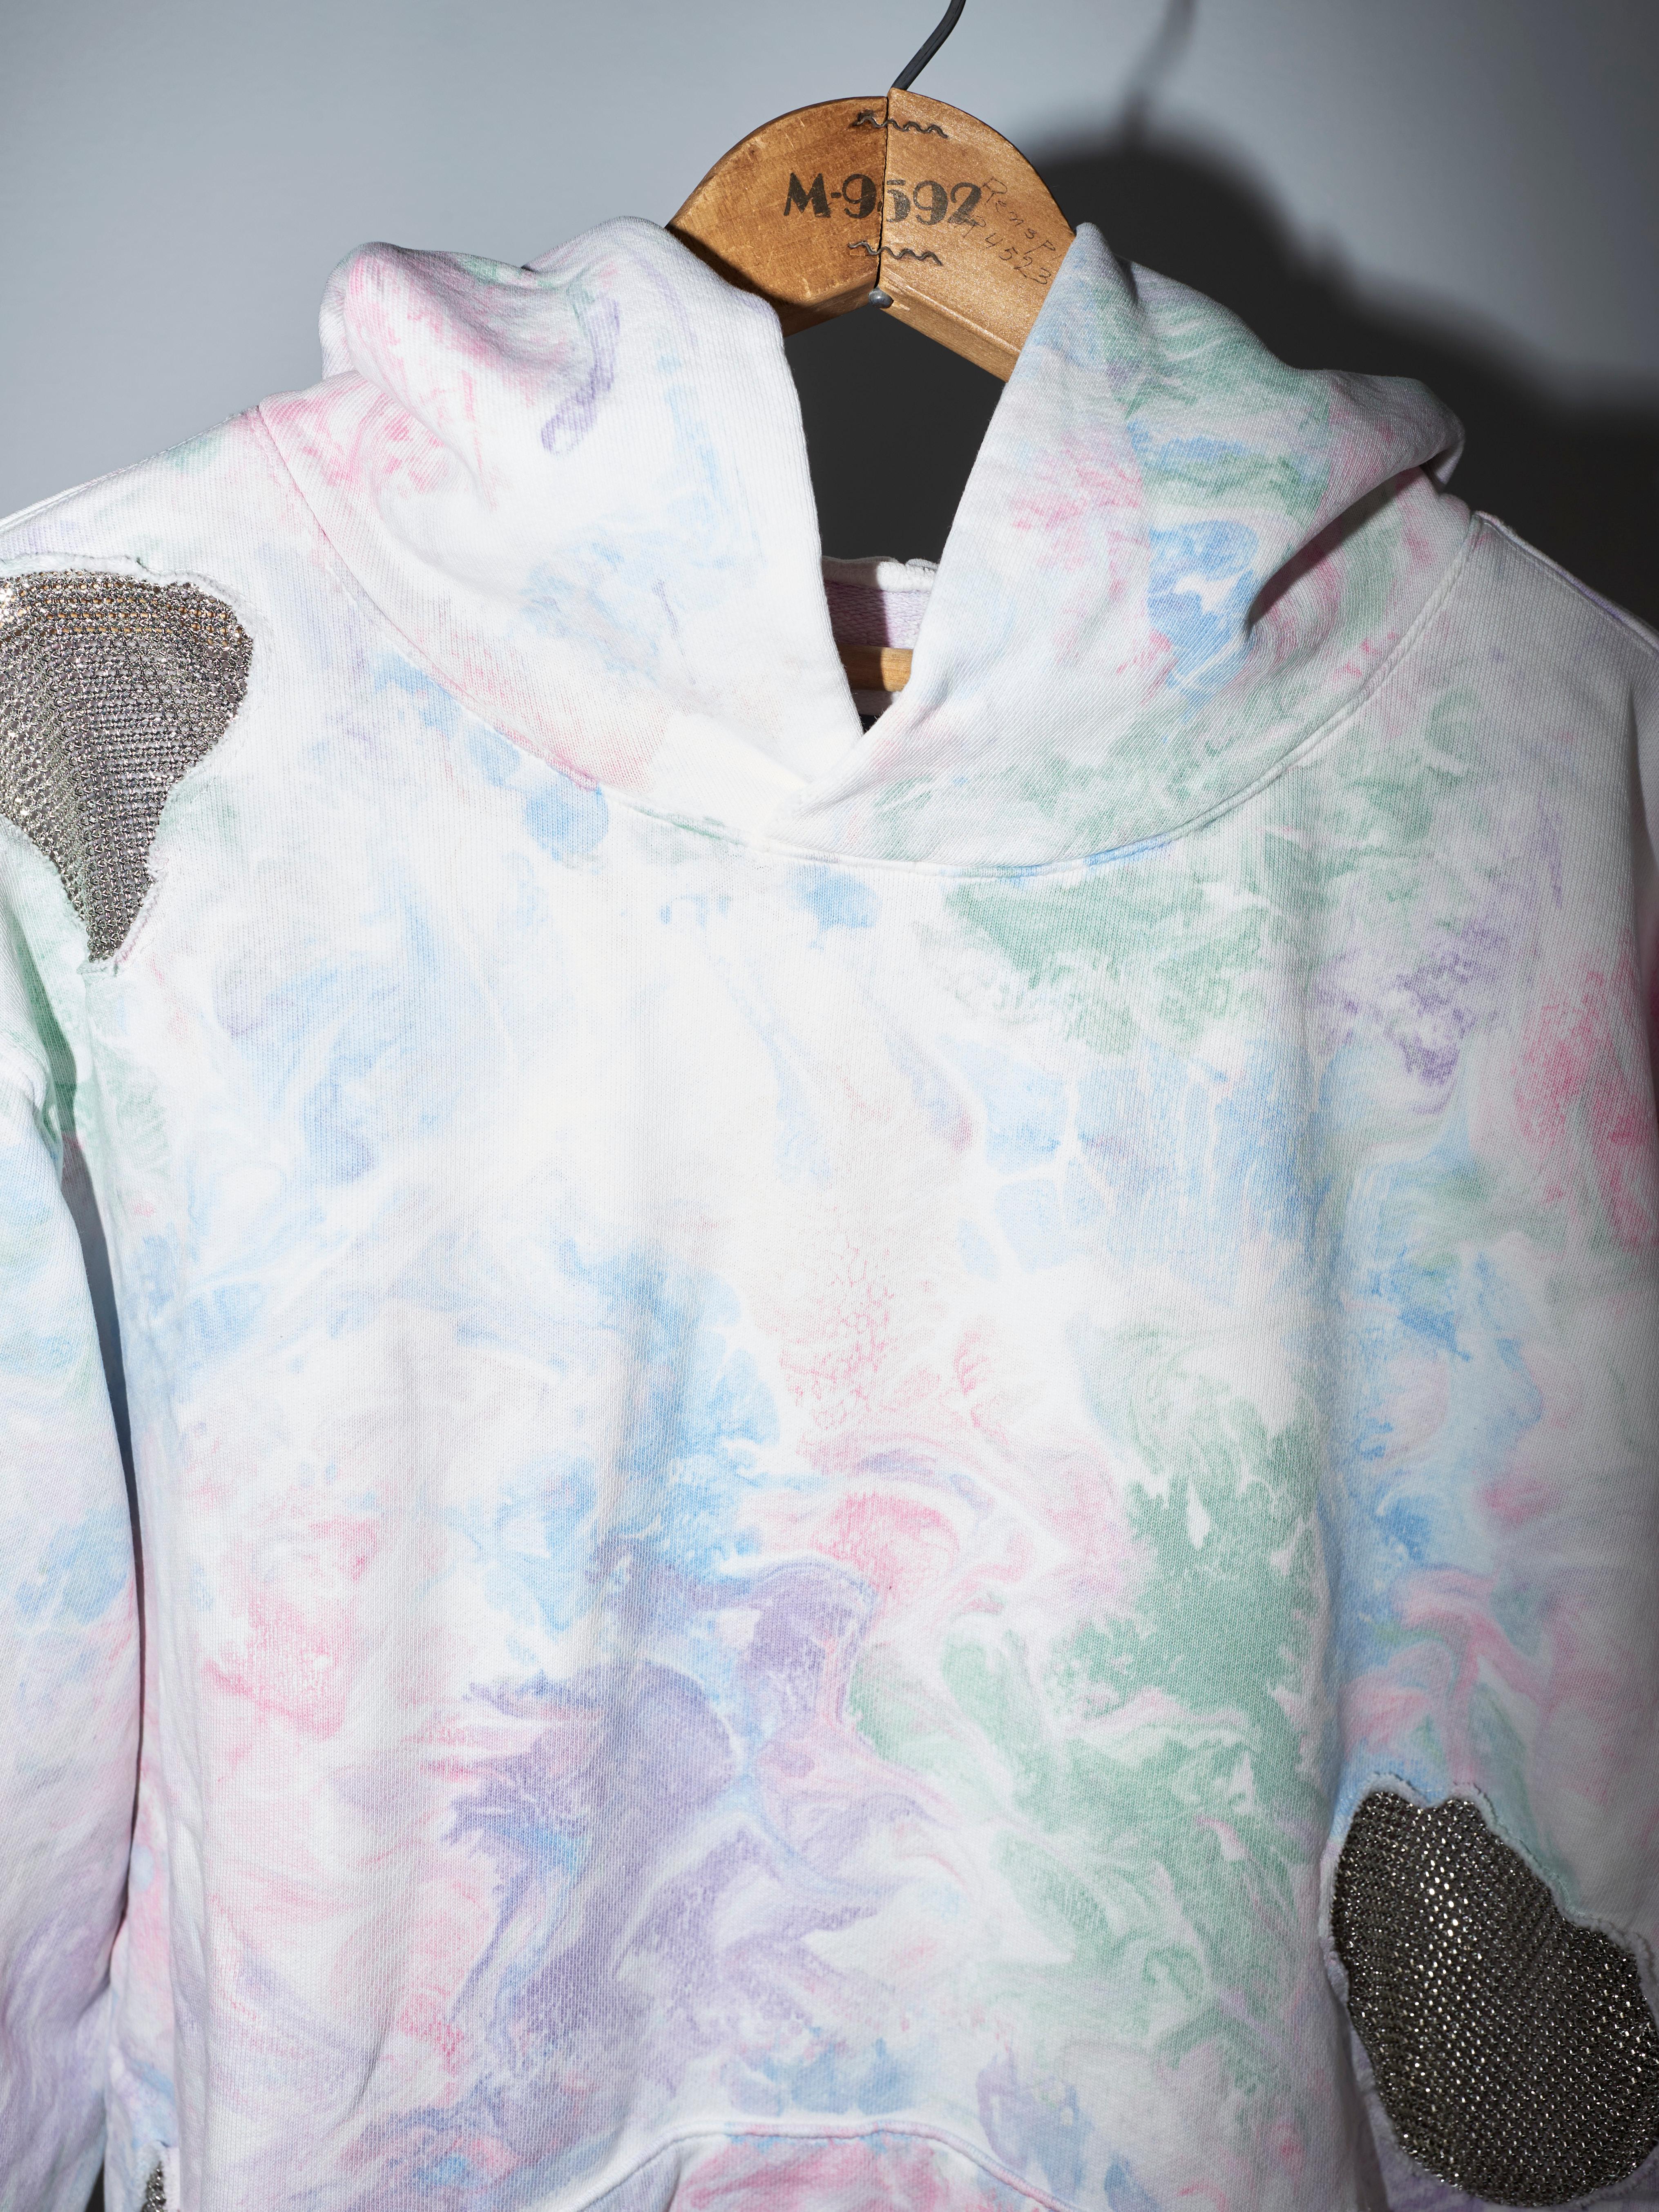 Hoodie Pastel Marble Cotton Embellished Chain Patchwork J Dauphin 3